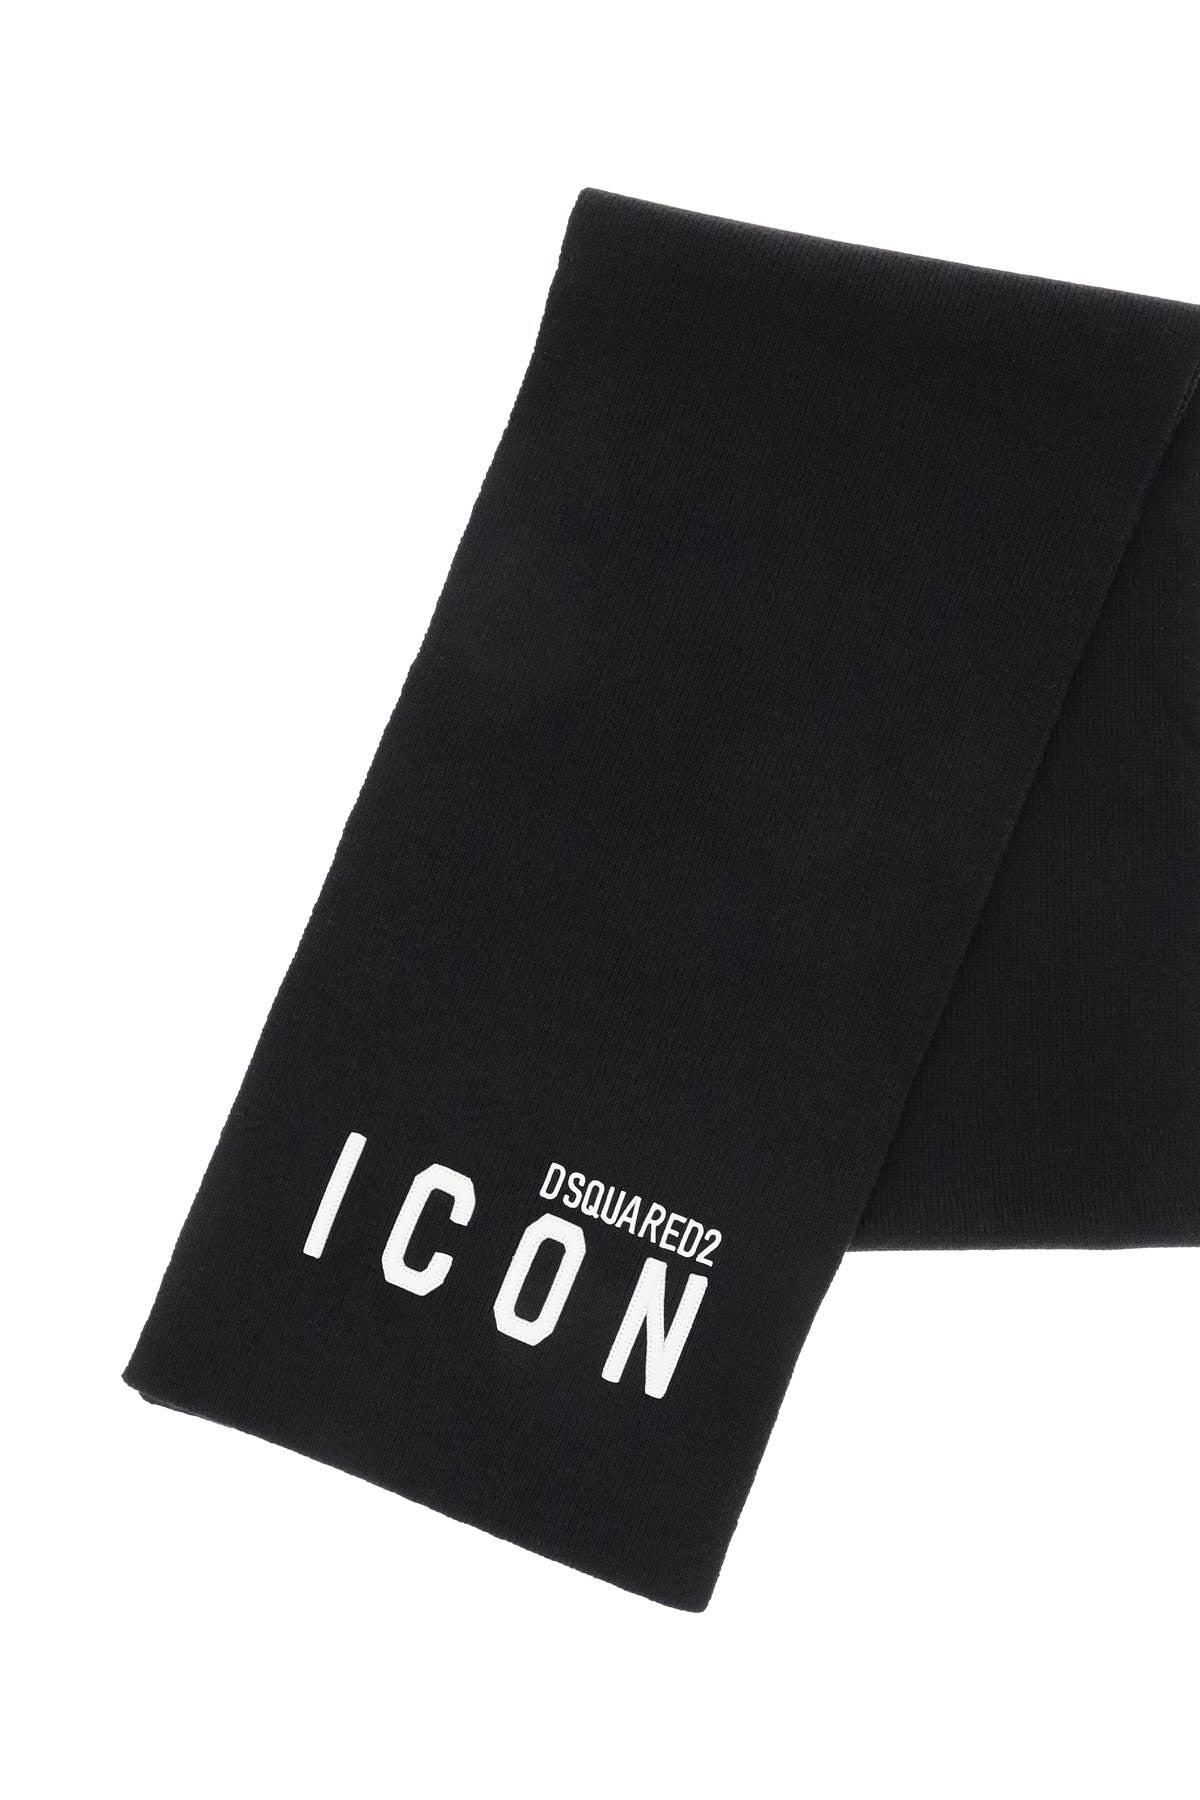 DSquared² 'icon' Wool Scarf in Black for Men | Lyst